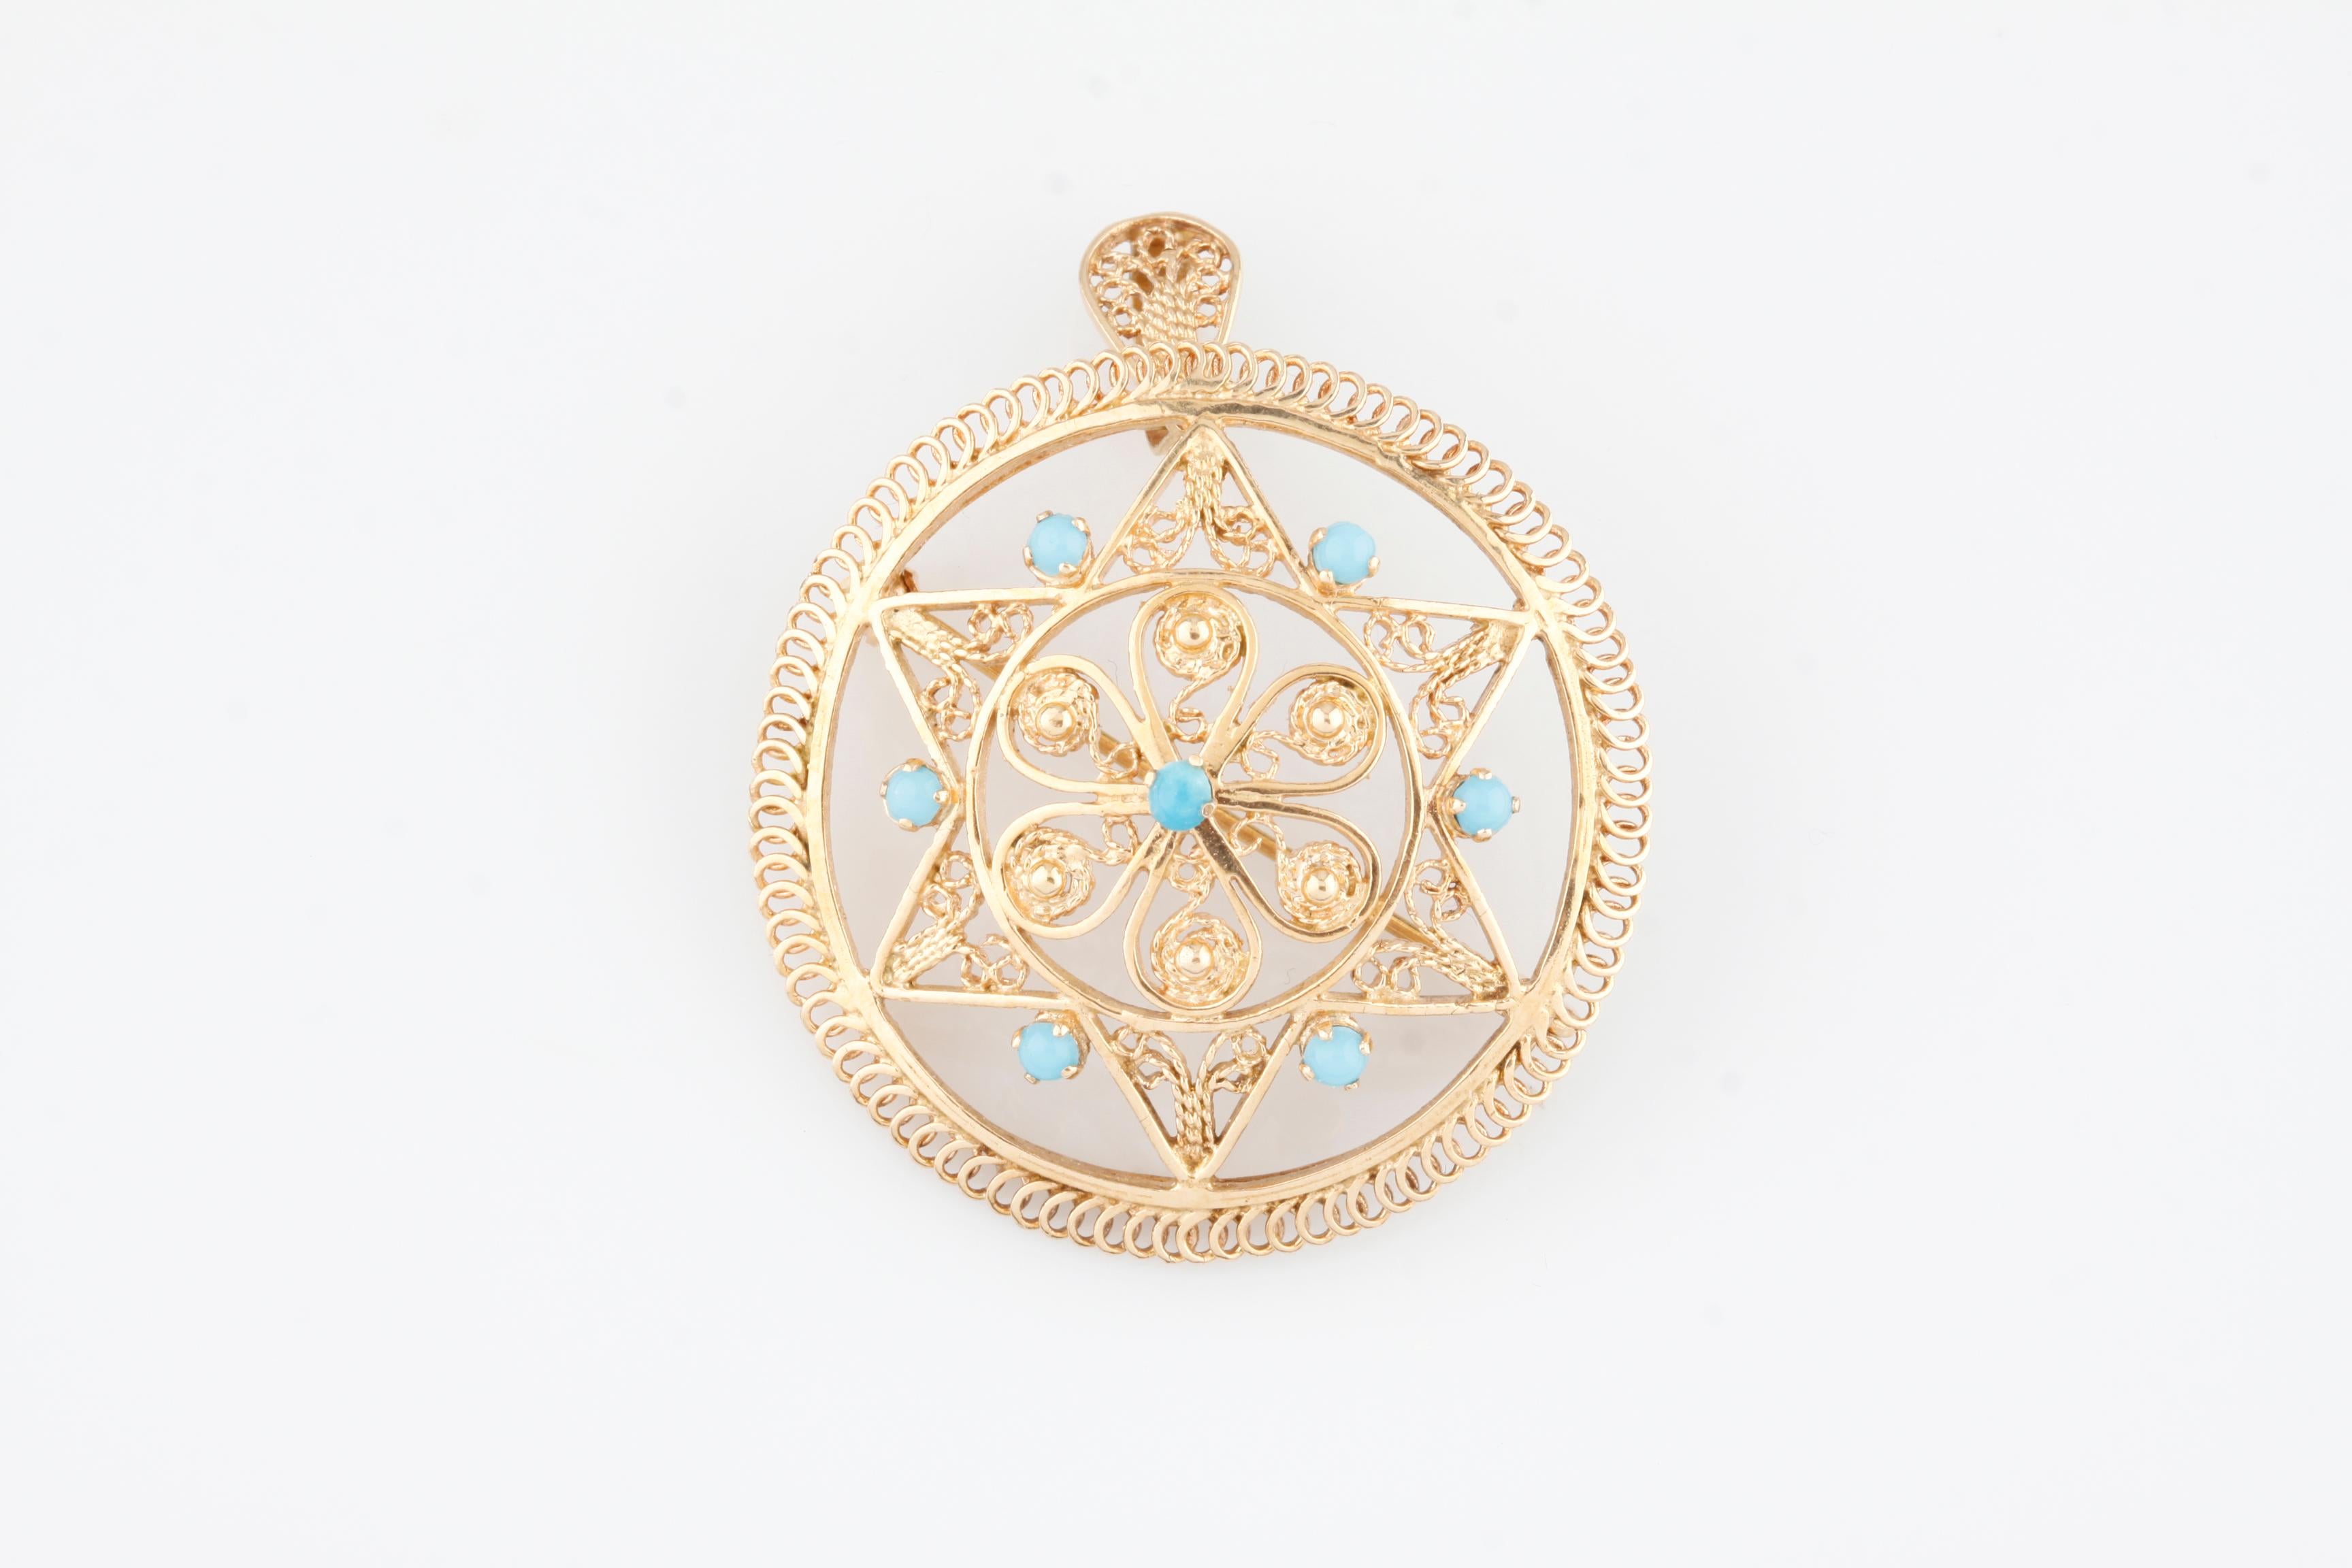 Gorgeous Intricate Wire Filigree 14k Yellow Gold Star of David Pendant/Brooch
Features Prong Set Seed Turquoise Accents
Diameter of Pendant = 38 mm
Total Mass = 10 grams
Piece is in Good Condition. Shows Few Signs of Aging or Wear. See photos and